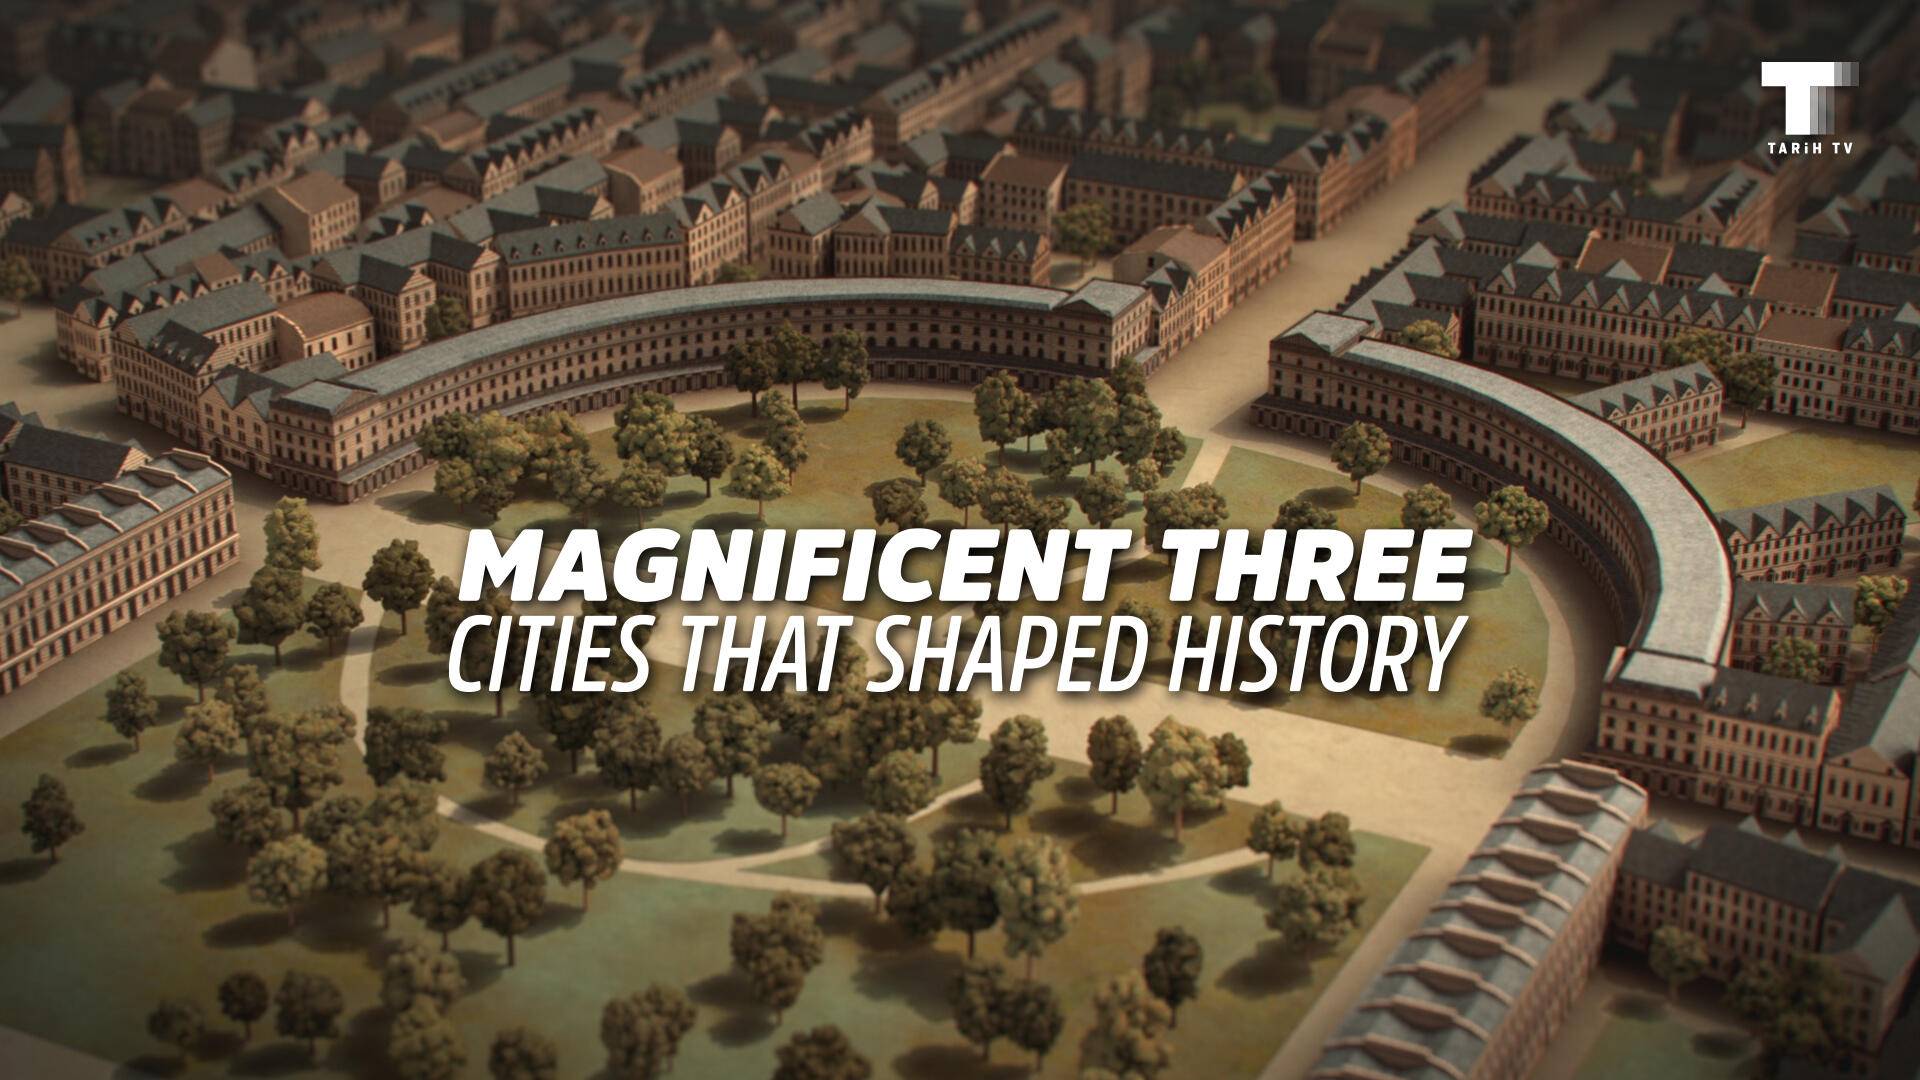 Magnificent Three: Cities That Shaped History